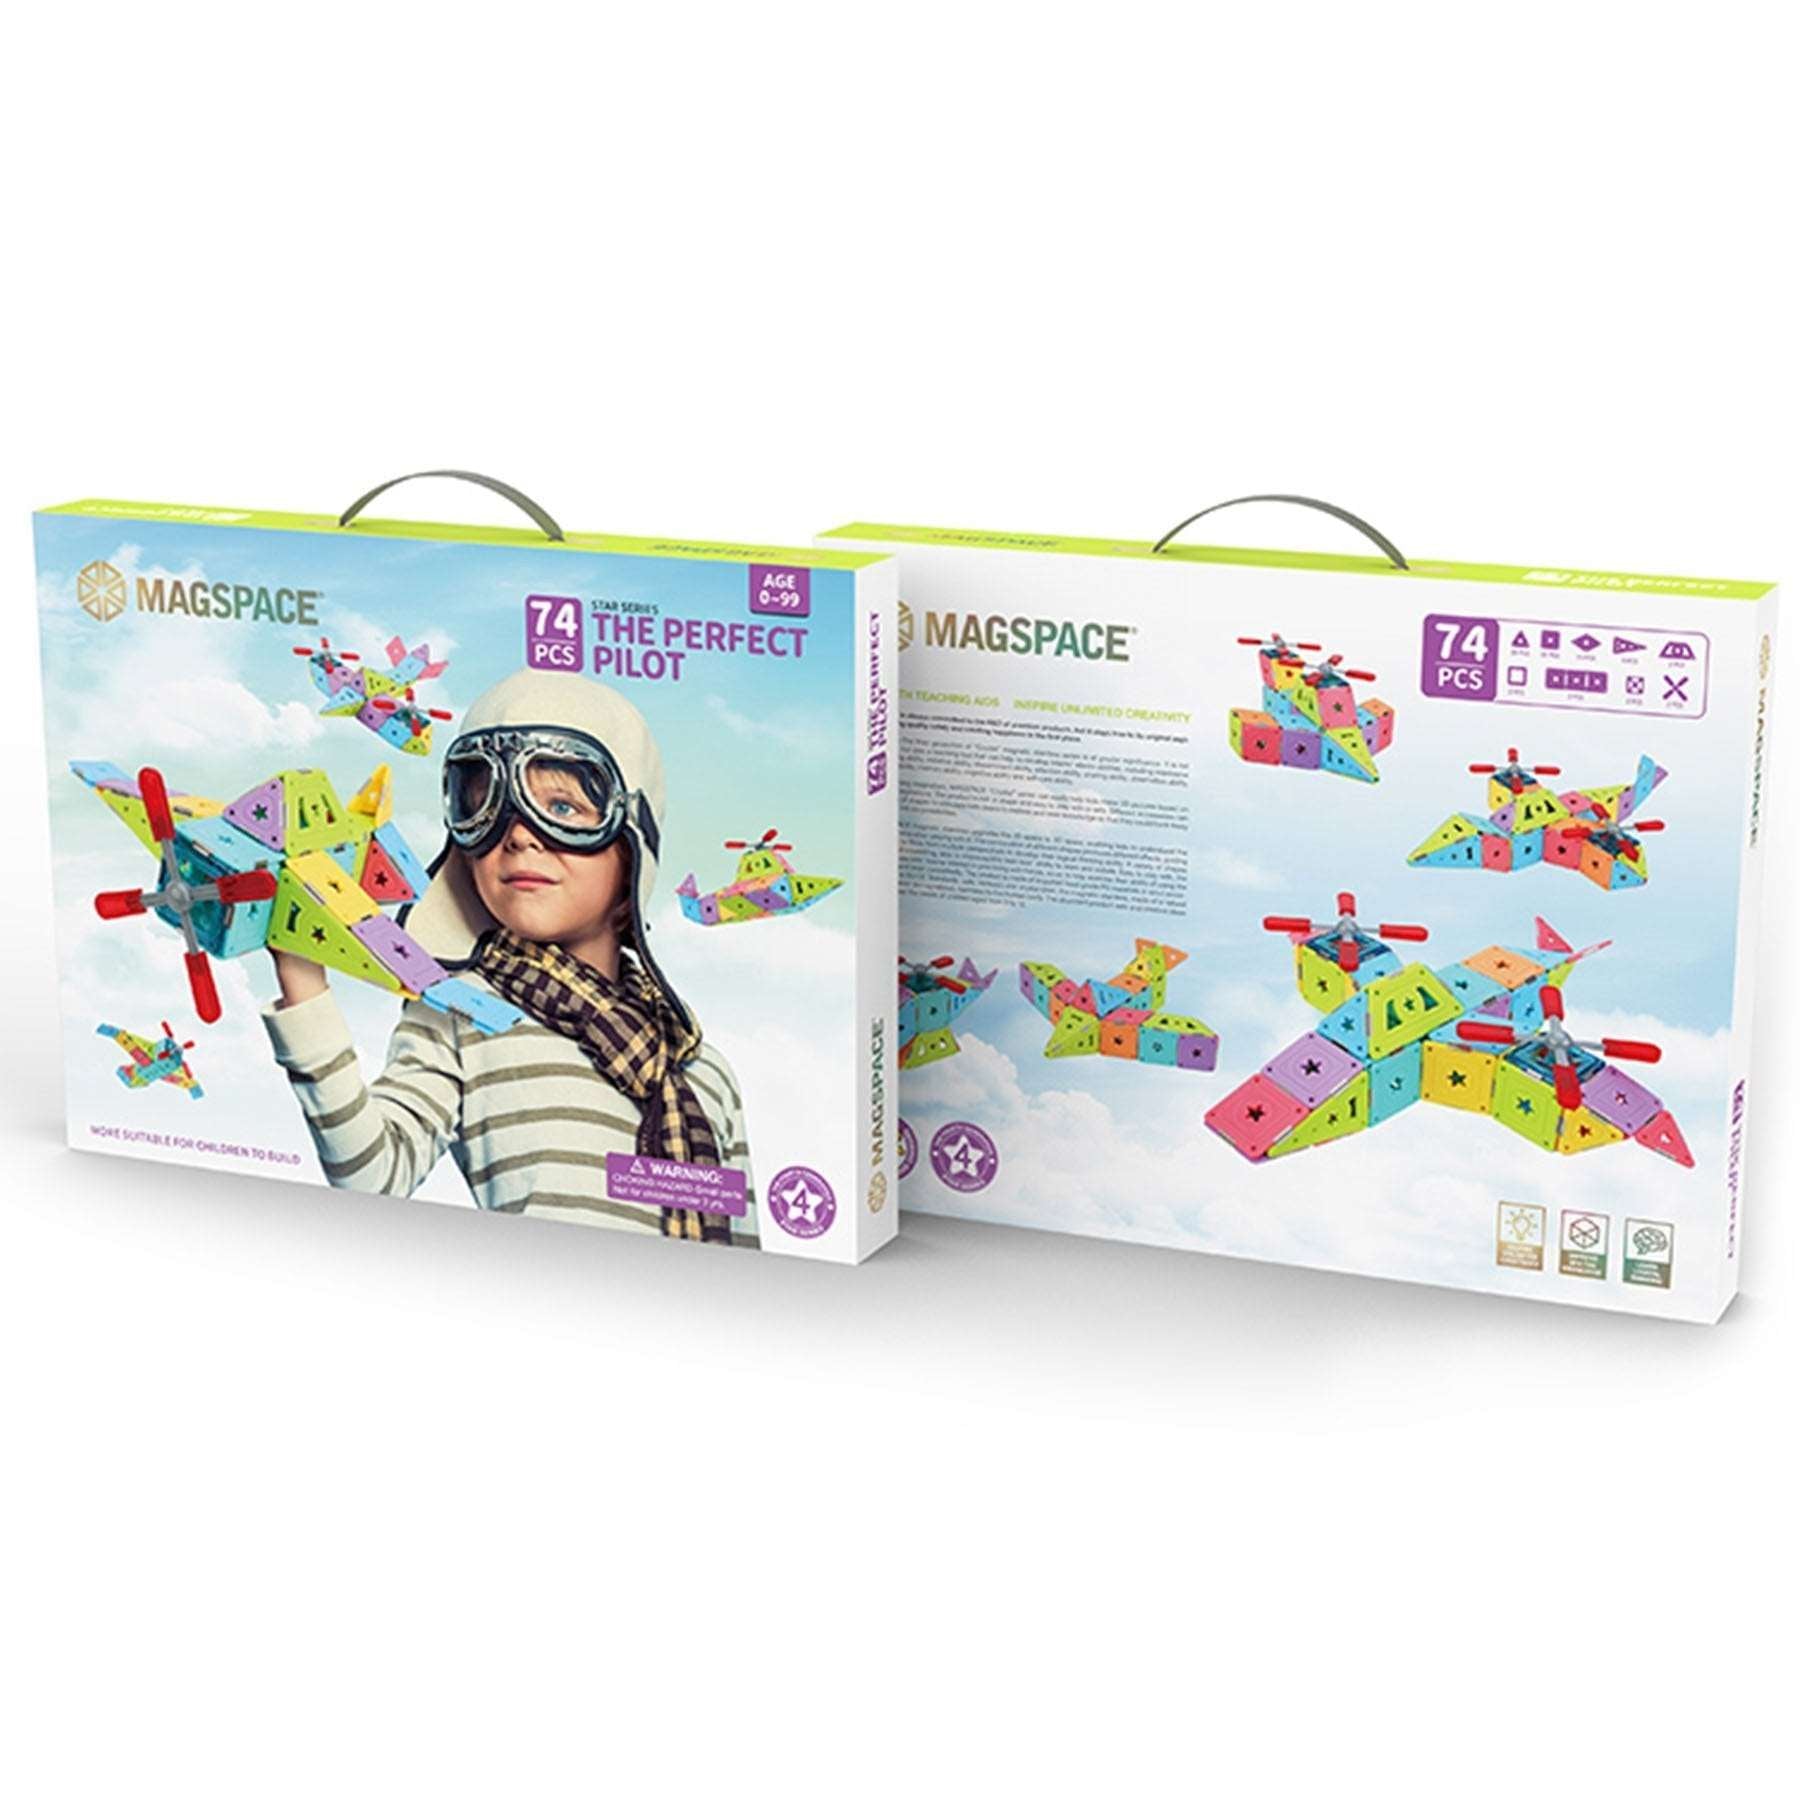 Magspace Magnetic Building Blocks The Perfect Pilot - Soft Glue Star 74pcs freeshipping - GeorgiePorgy